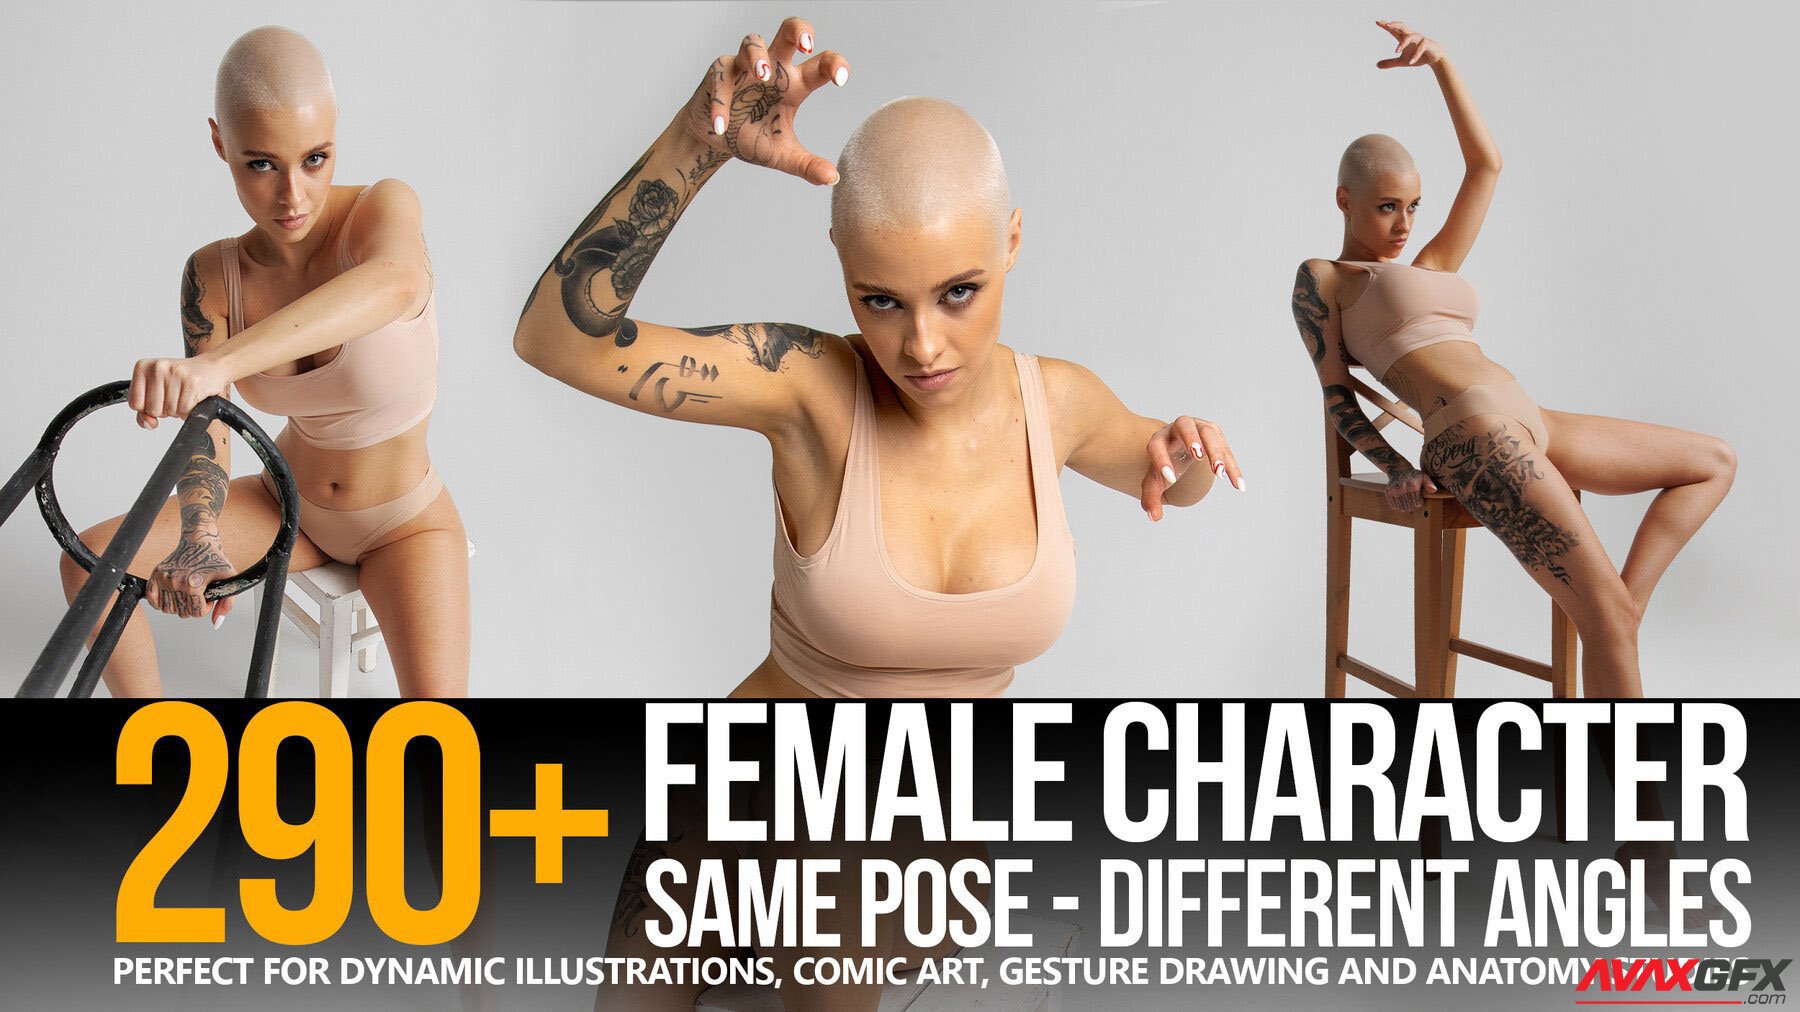 ArtStation Same Pose Different Angles Female Character Reference Pictures 290